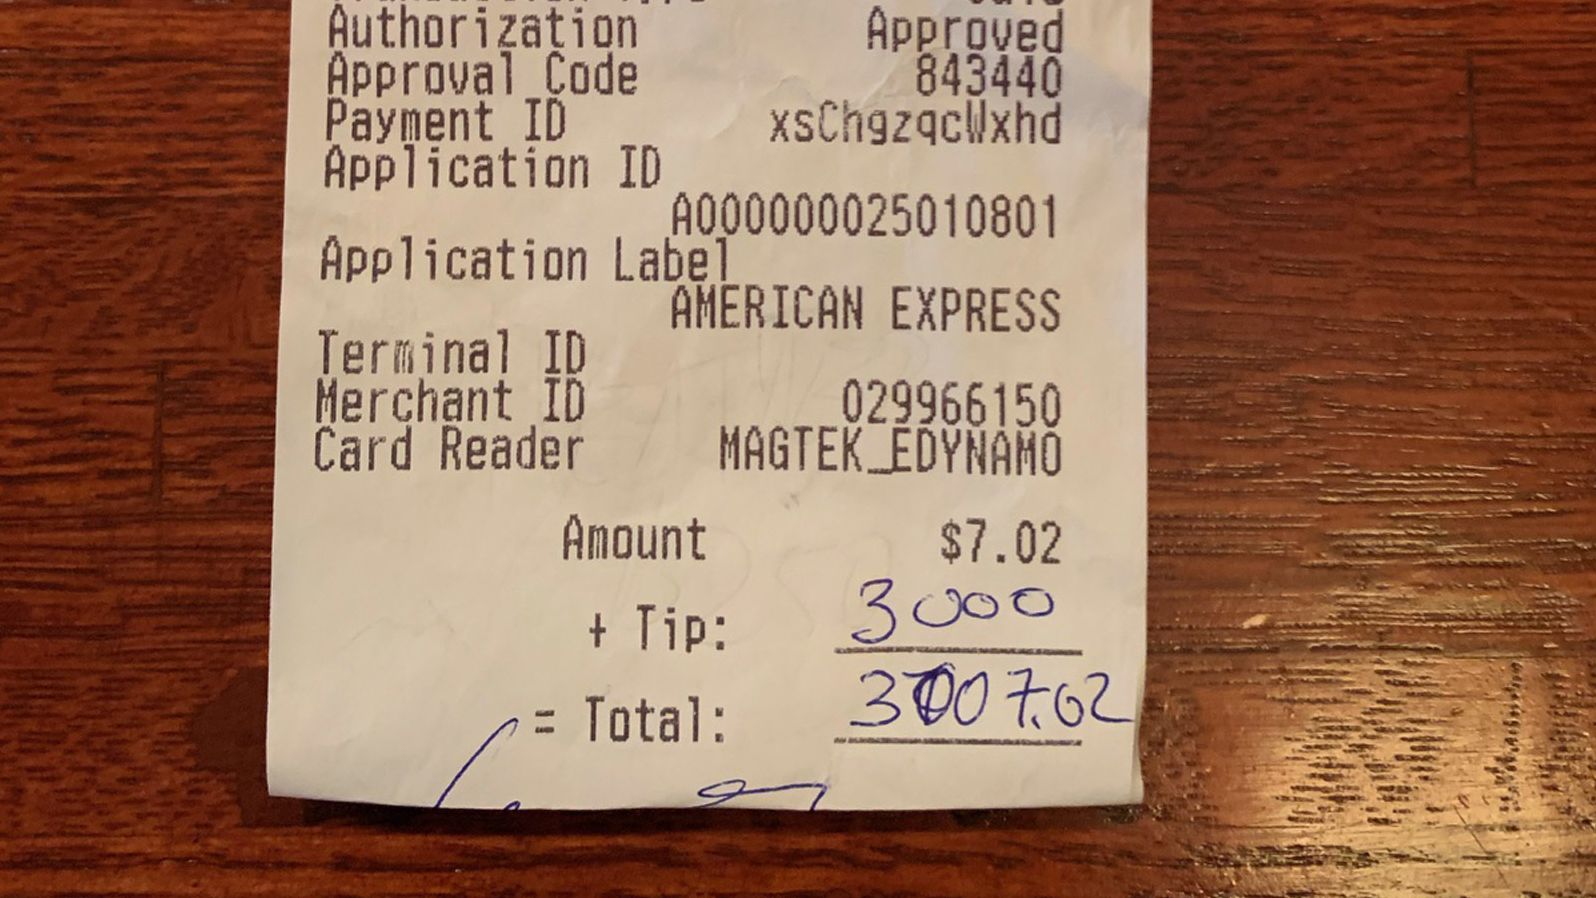 The customer placed the check on the table and told the owner he would see him when they reopen. 